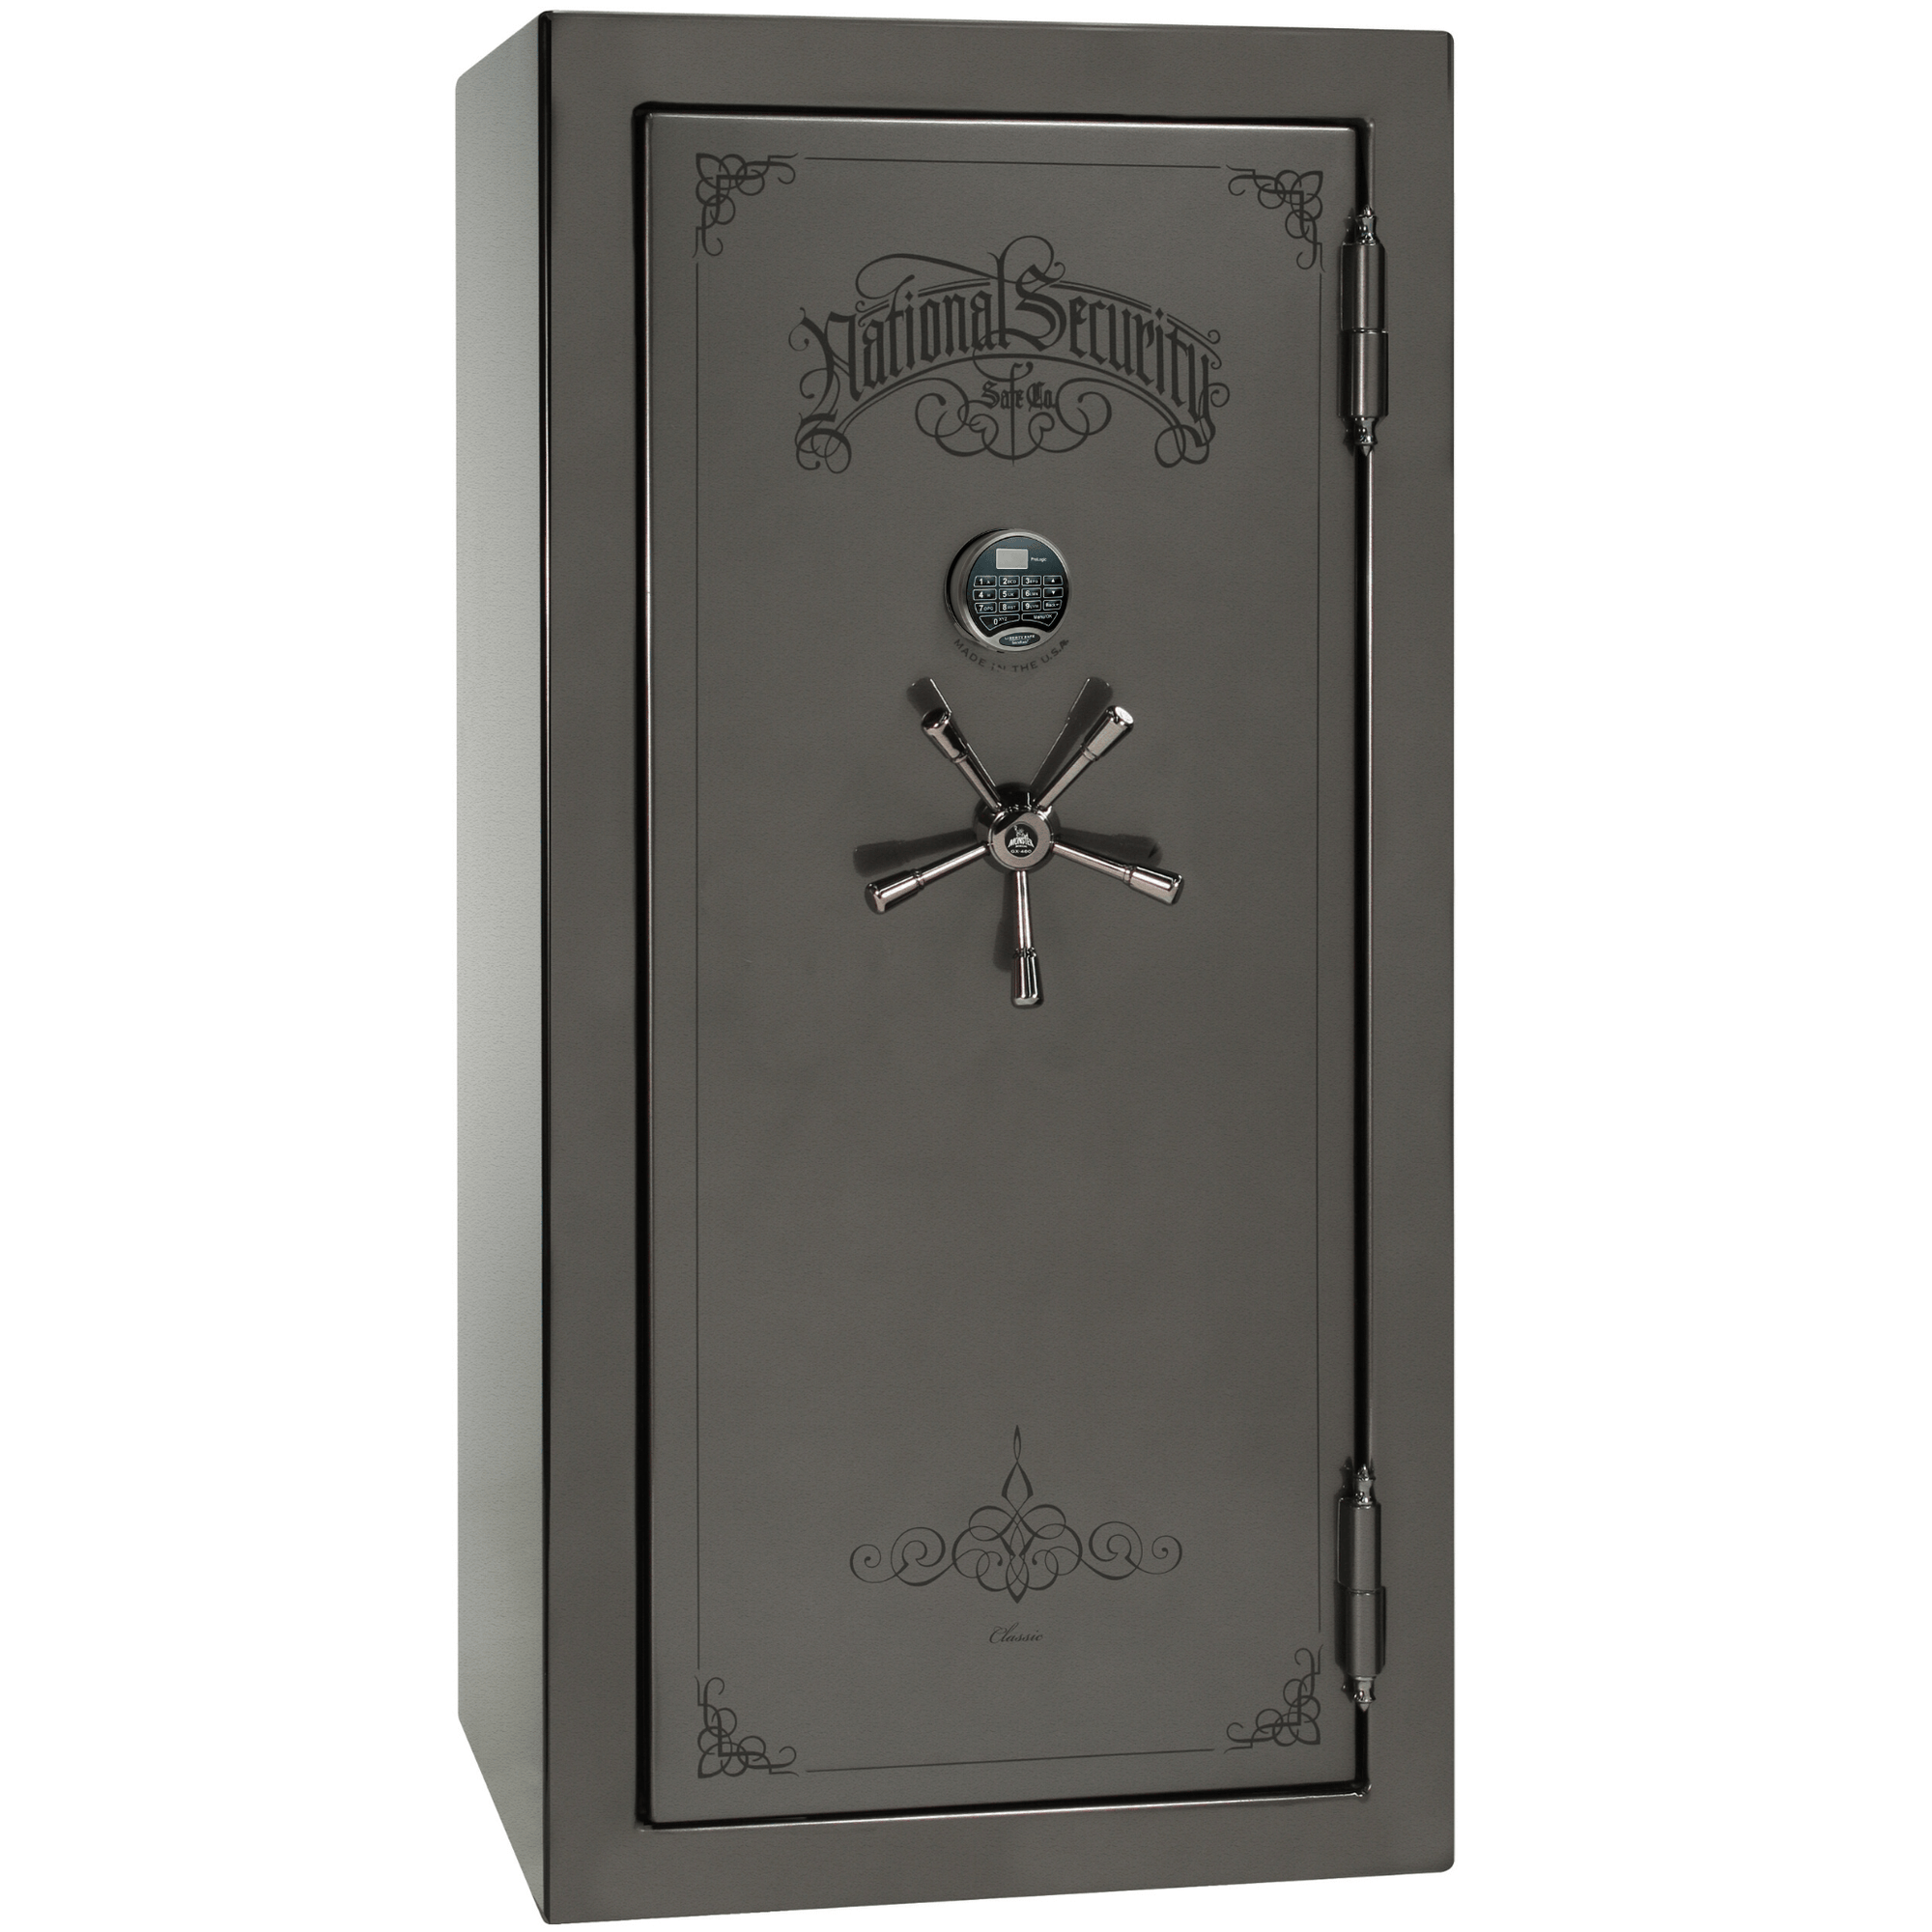 Liberty Safe Classic Plus 25 in Gray Marble with Black Chrome Electronic Lock, closed door.